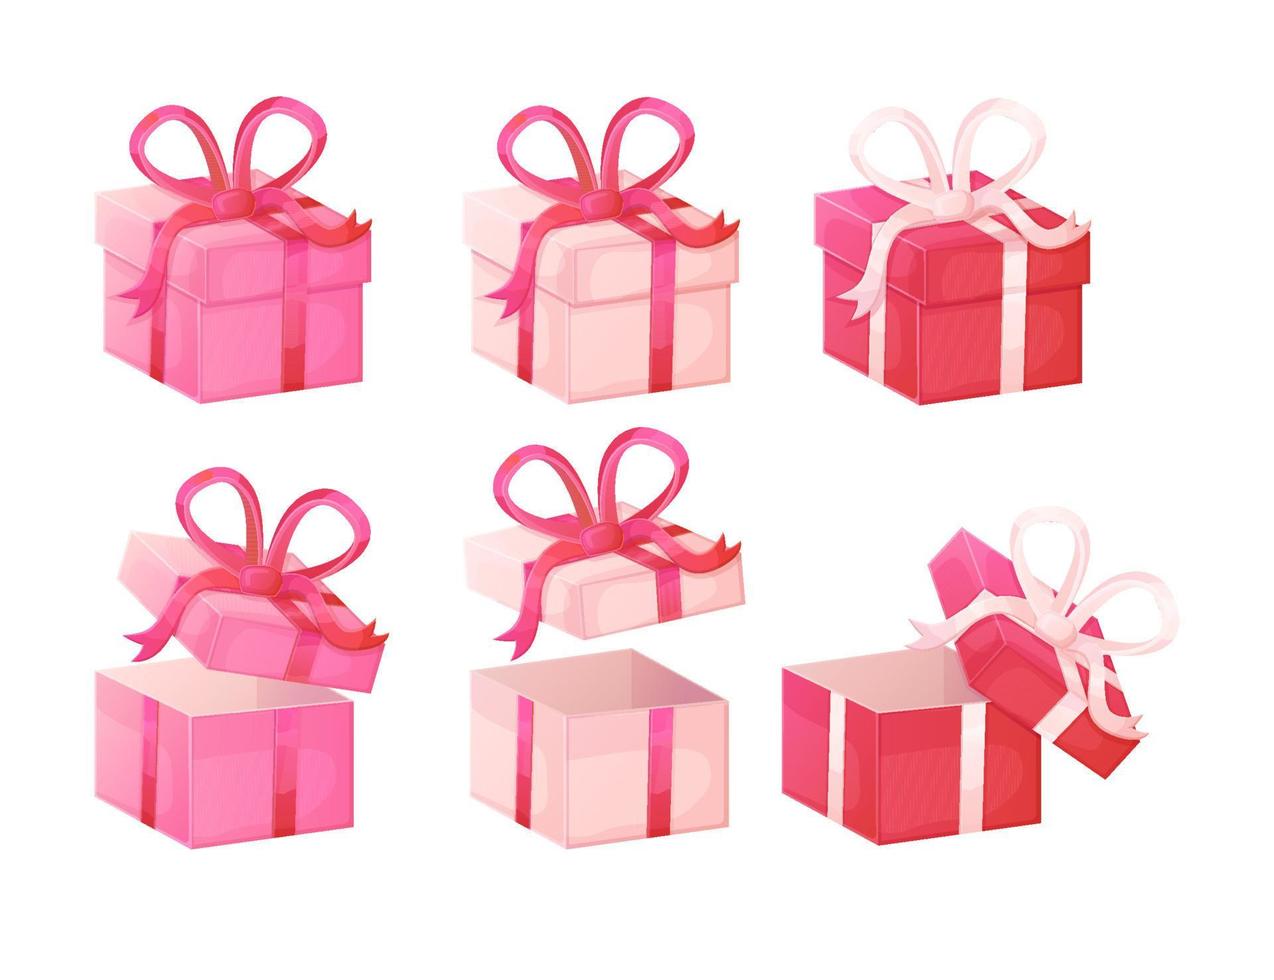 Closed and opened pink and red boxes with red, white ribbon bows. Illustration isolated on white background in realistic cartoon style. vector